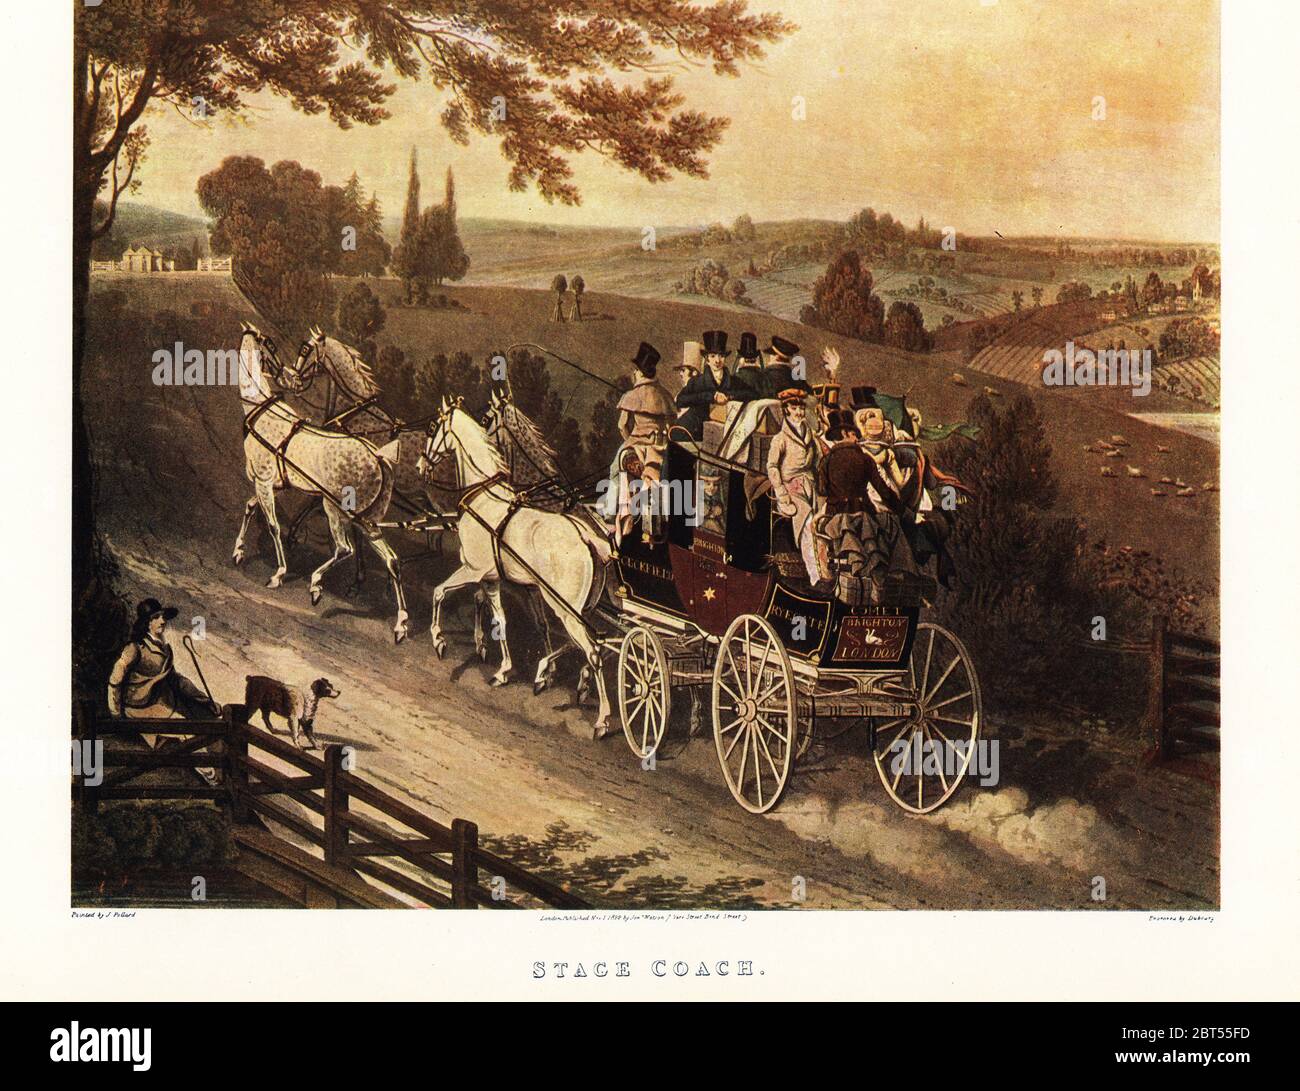 Stage coach driven by four horses and laden down with passengers and luggare moving along up a country lane through a bucolic landscape, 1822. Brighton to London stage coach Comet on Ryegate Hill. Color print after an engraving by Dubourg from an illustration by James Pollard in Ralph Nevills Old Sporting Prints, The Connoisseur Magazine, London, 1908. Stock Photo